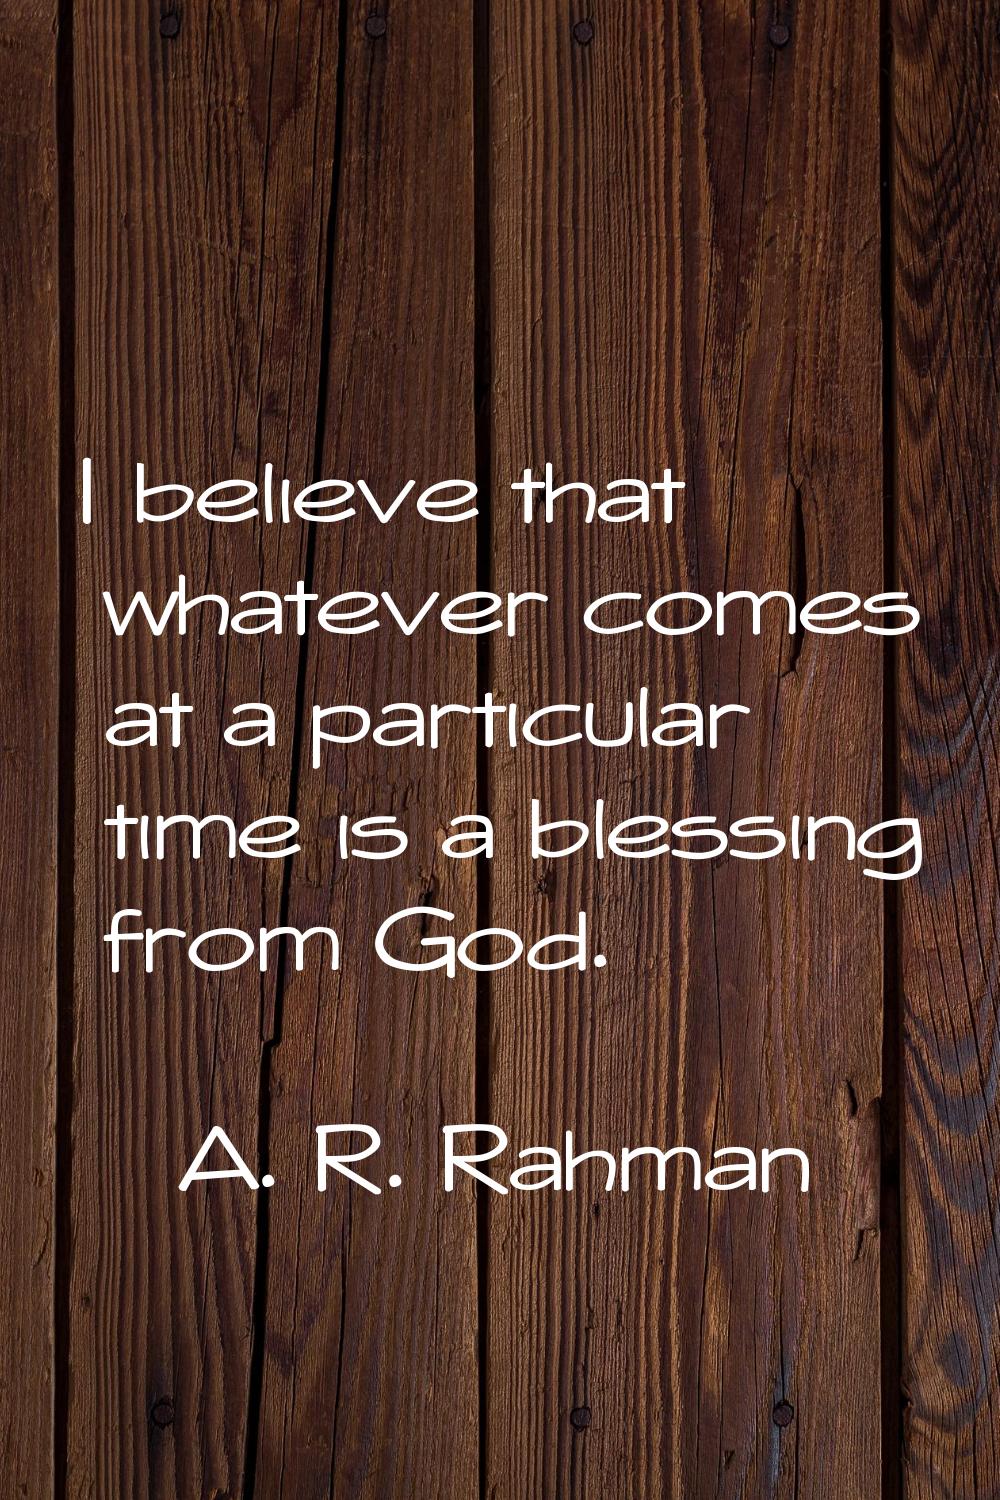 I believe that whatever comes at a particular time is a blessing from God.